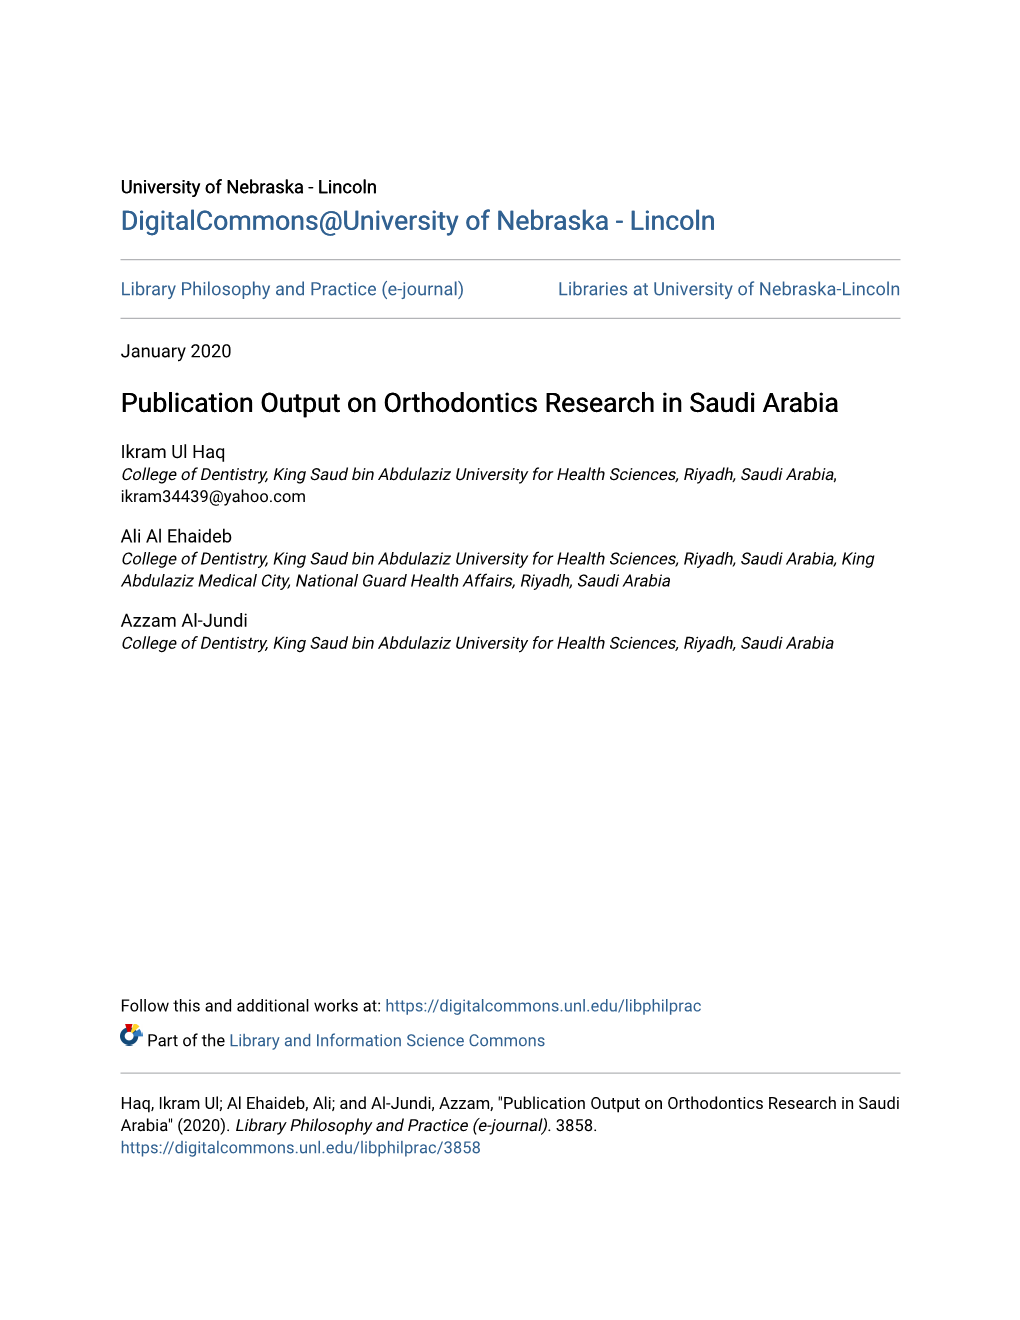 Publication Output on Orthodontics Research in Saudi Arabia